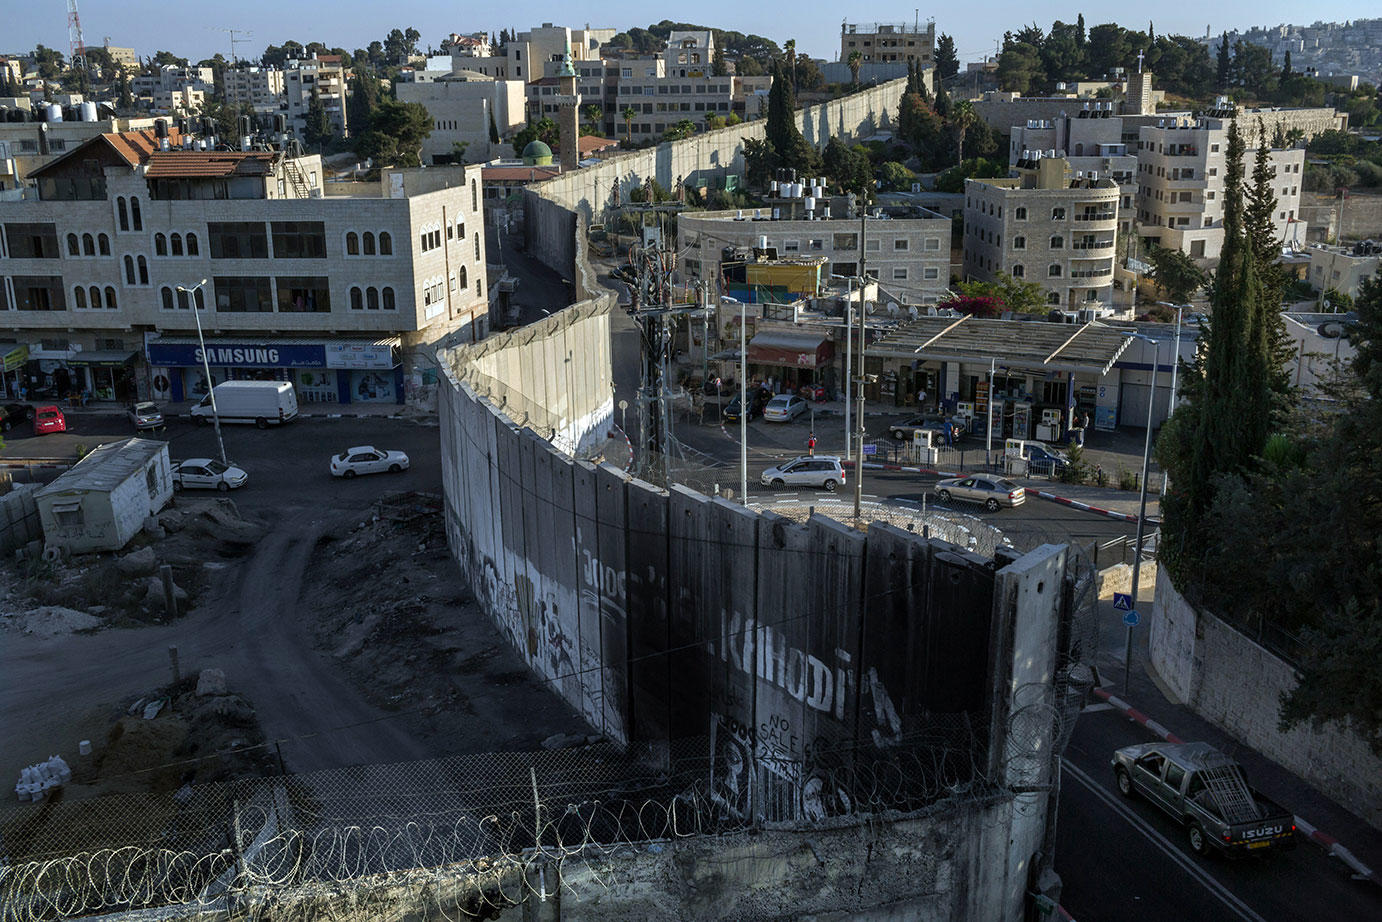 The wall dividing the Palestinian town of Abu Dis in the West Bank, left, from east Jerusalem. September 12, 2019. (Mauricio Lima/The New York Times)